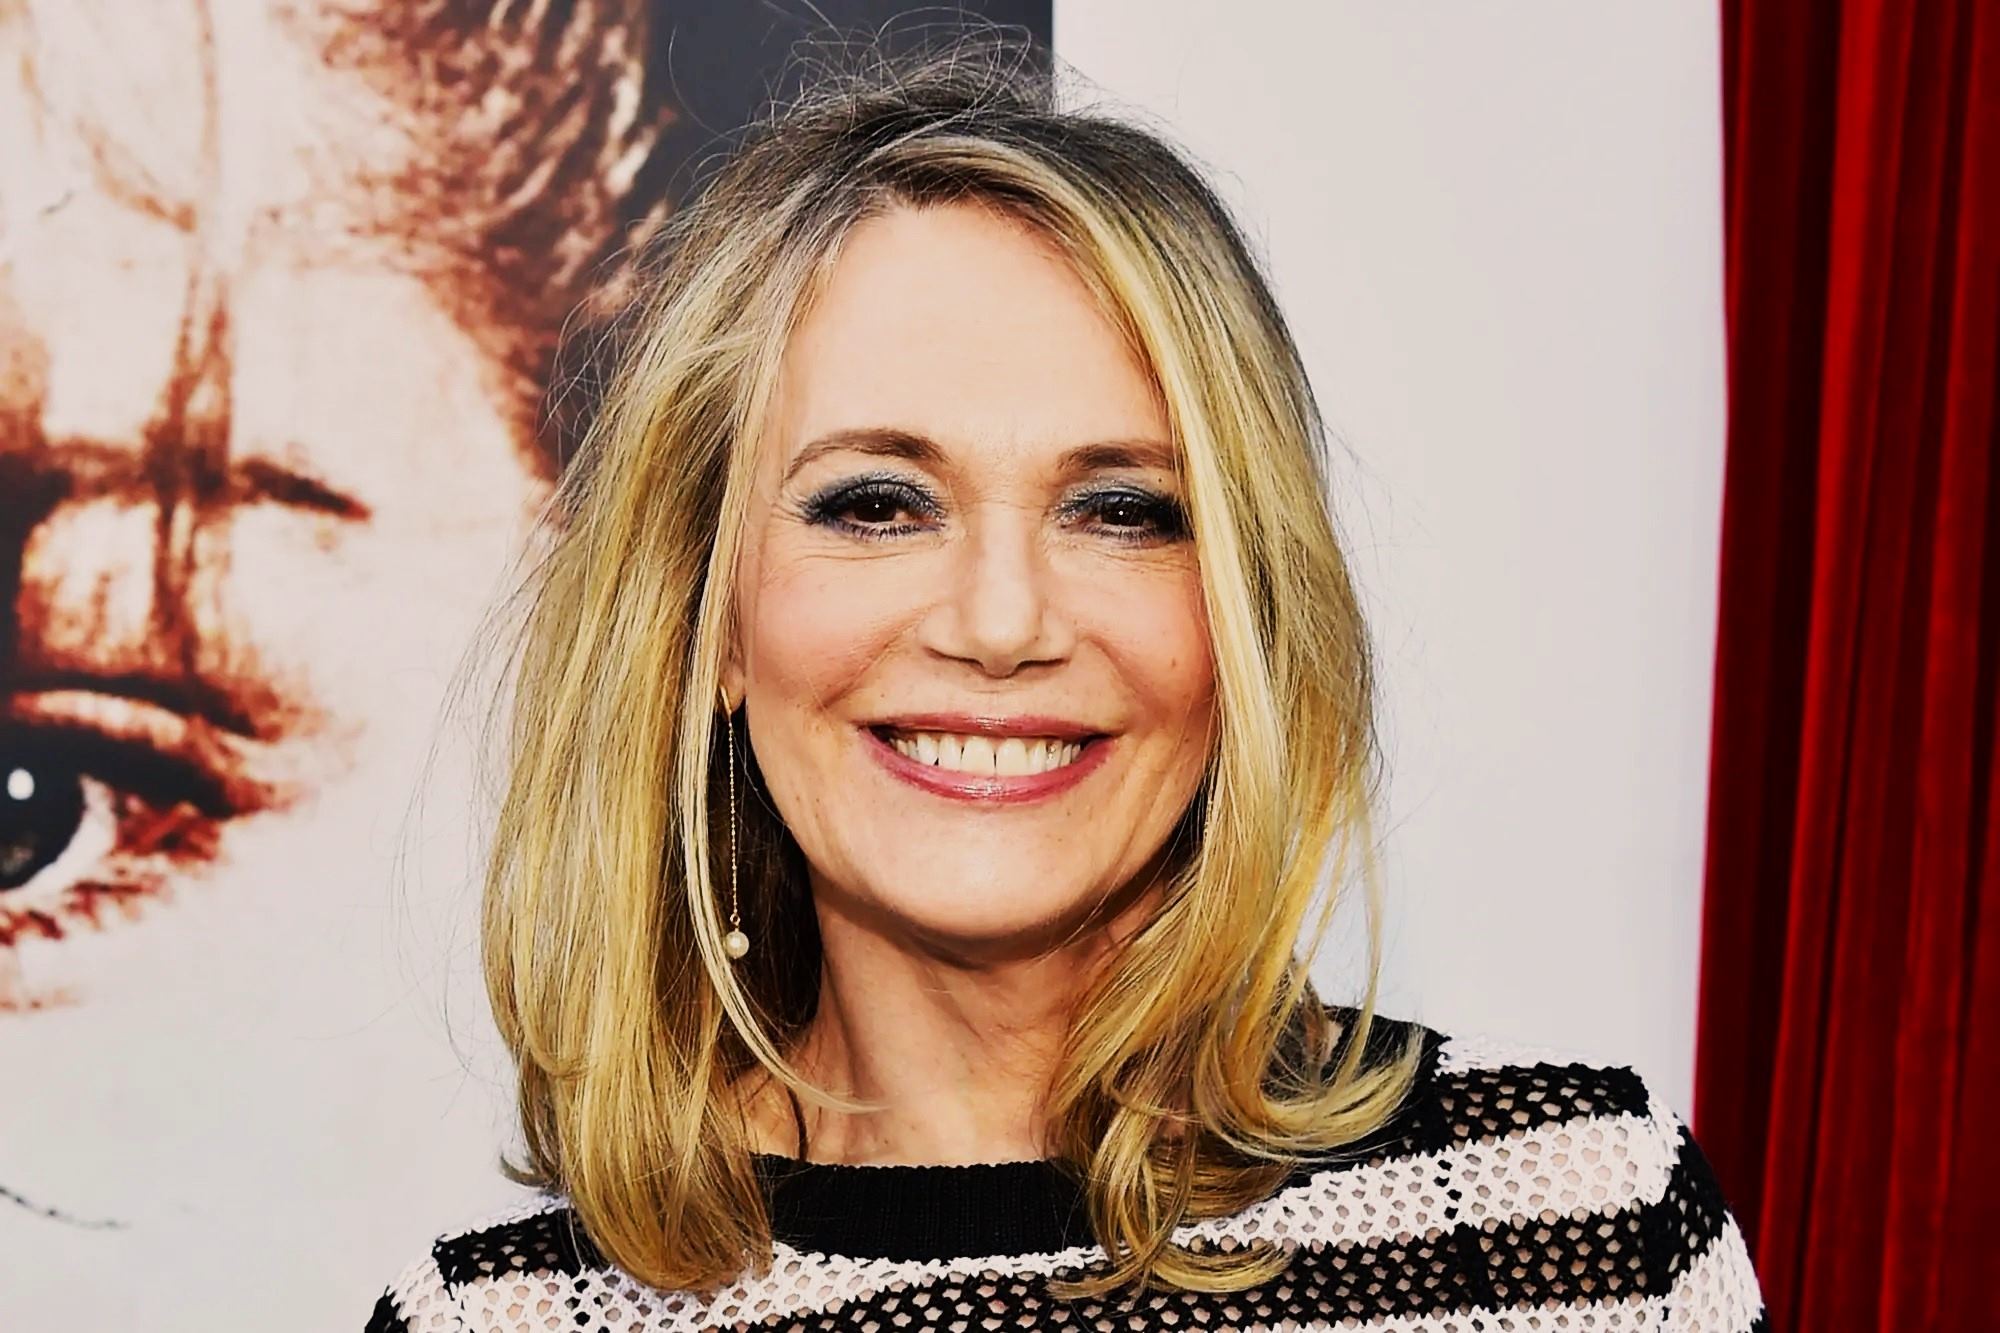 18 Surprising Facts About Peggy Lipton - Facts.net